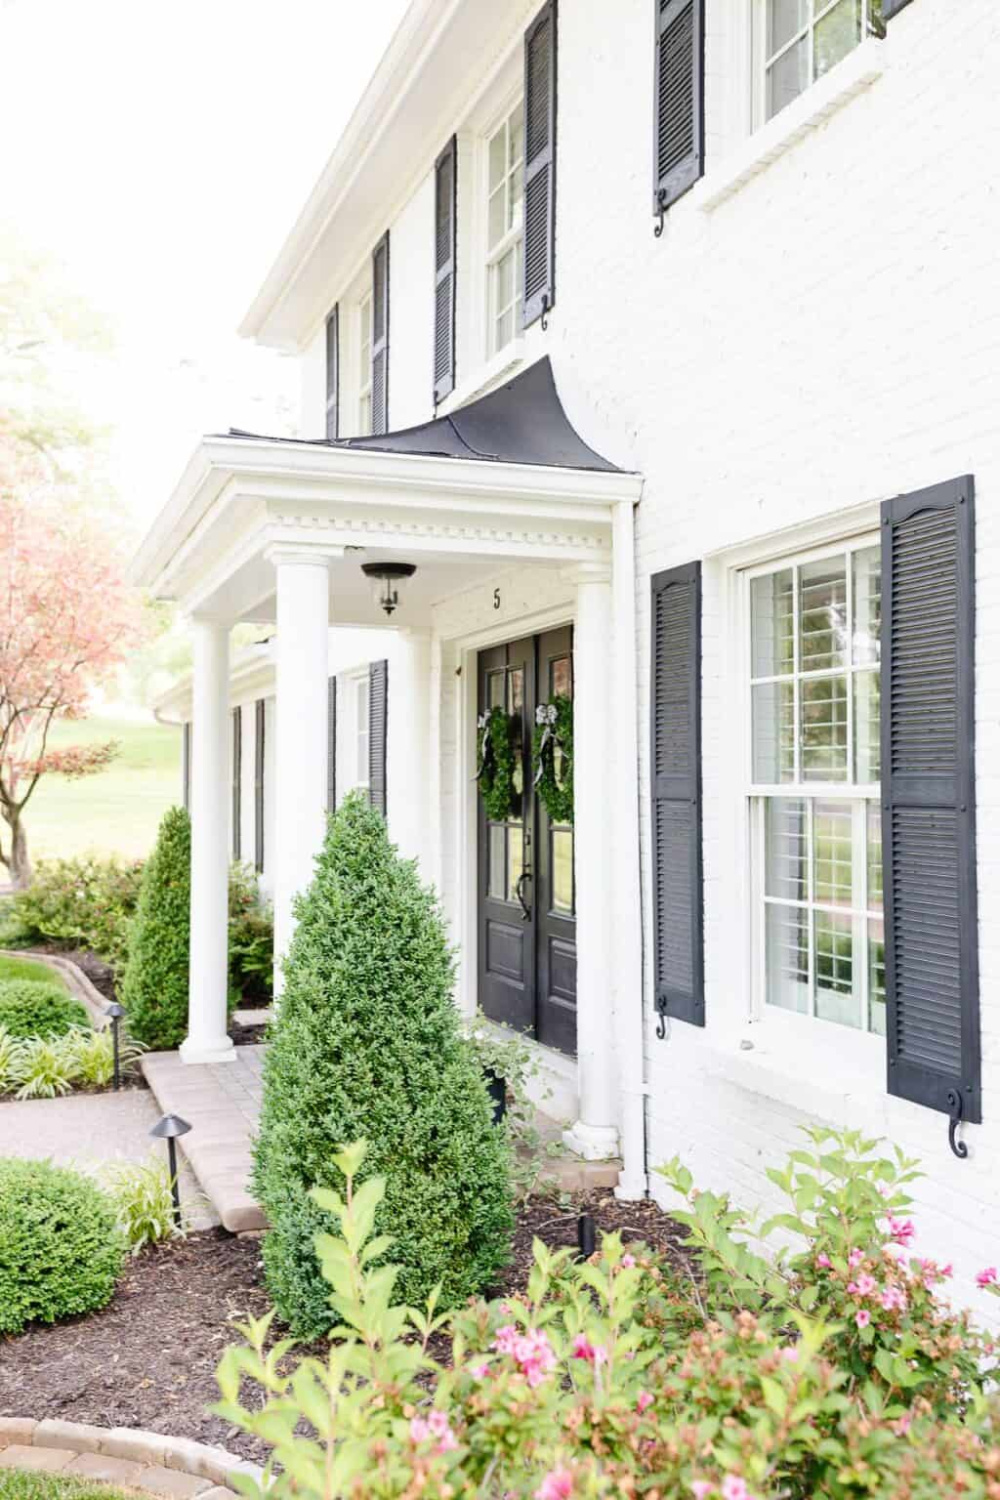 Simply White paint color (Benjamin Moore) on house exterior with black shutters - Julie Blanner. #simplywhitepaint #whitehouseexterior #paintcolors #housecolors